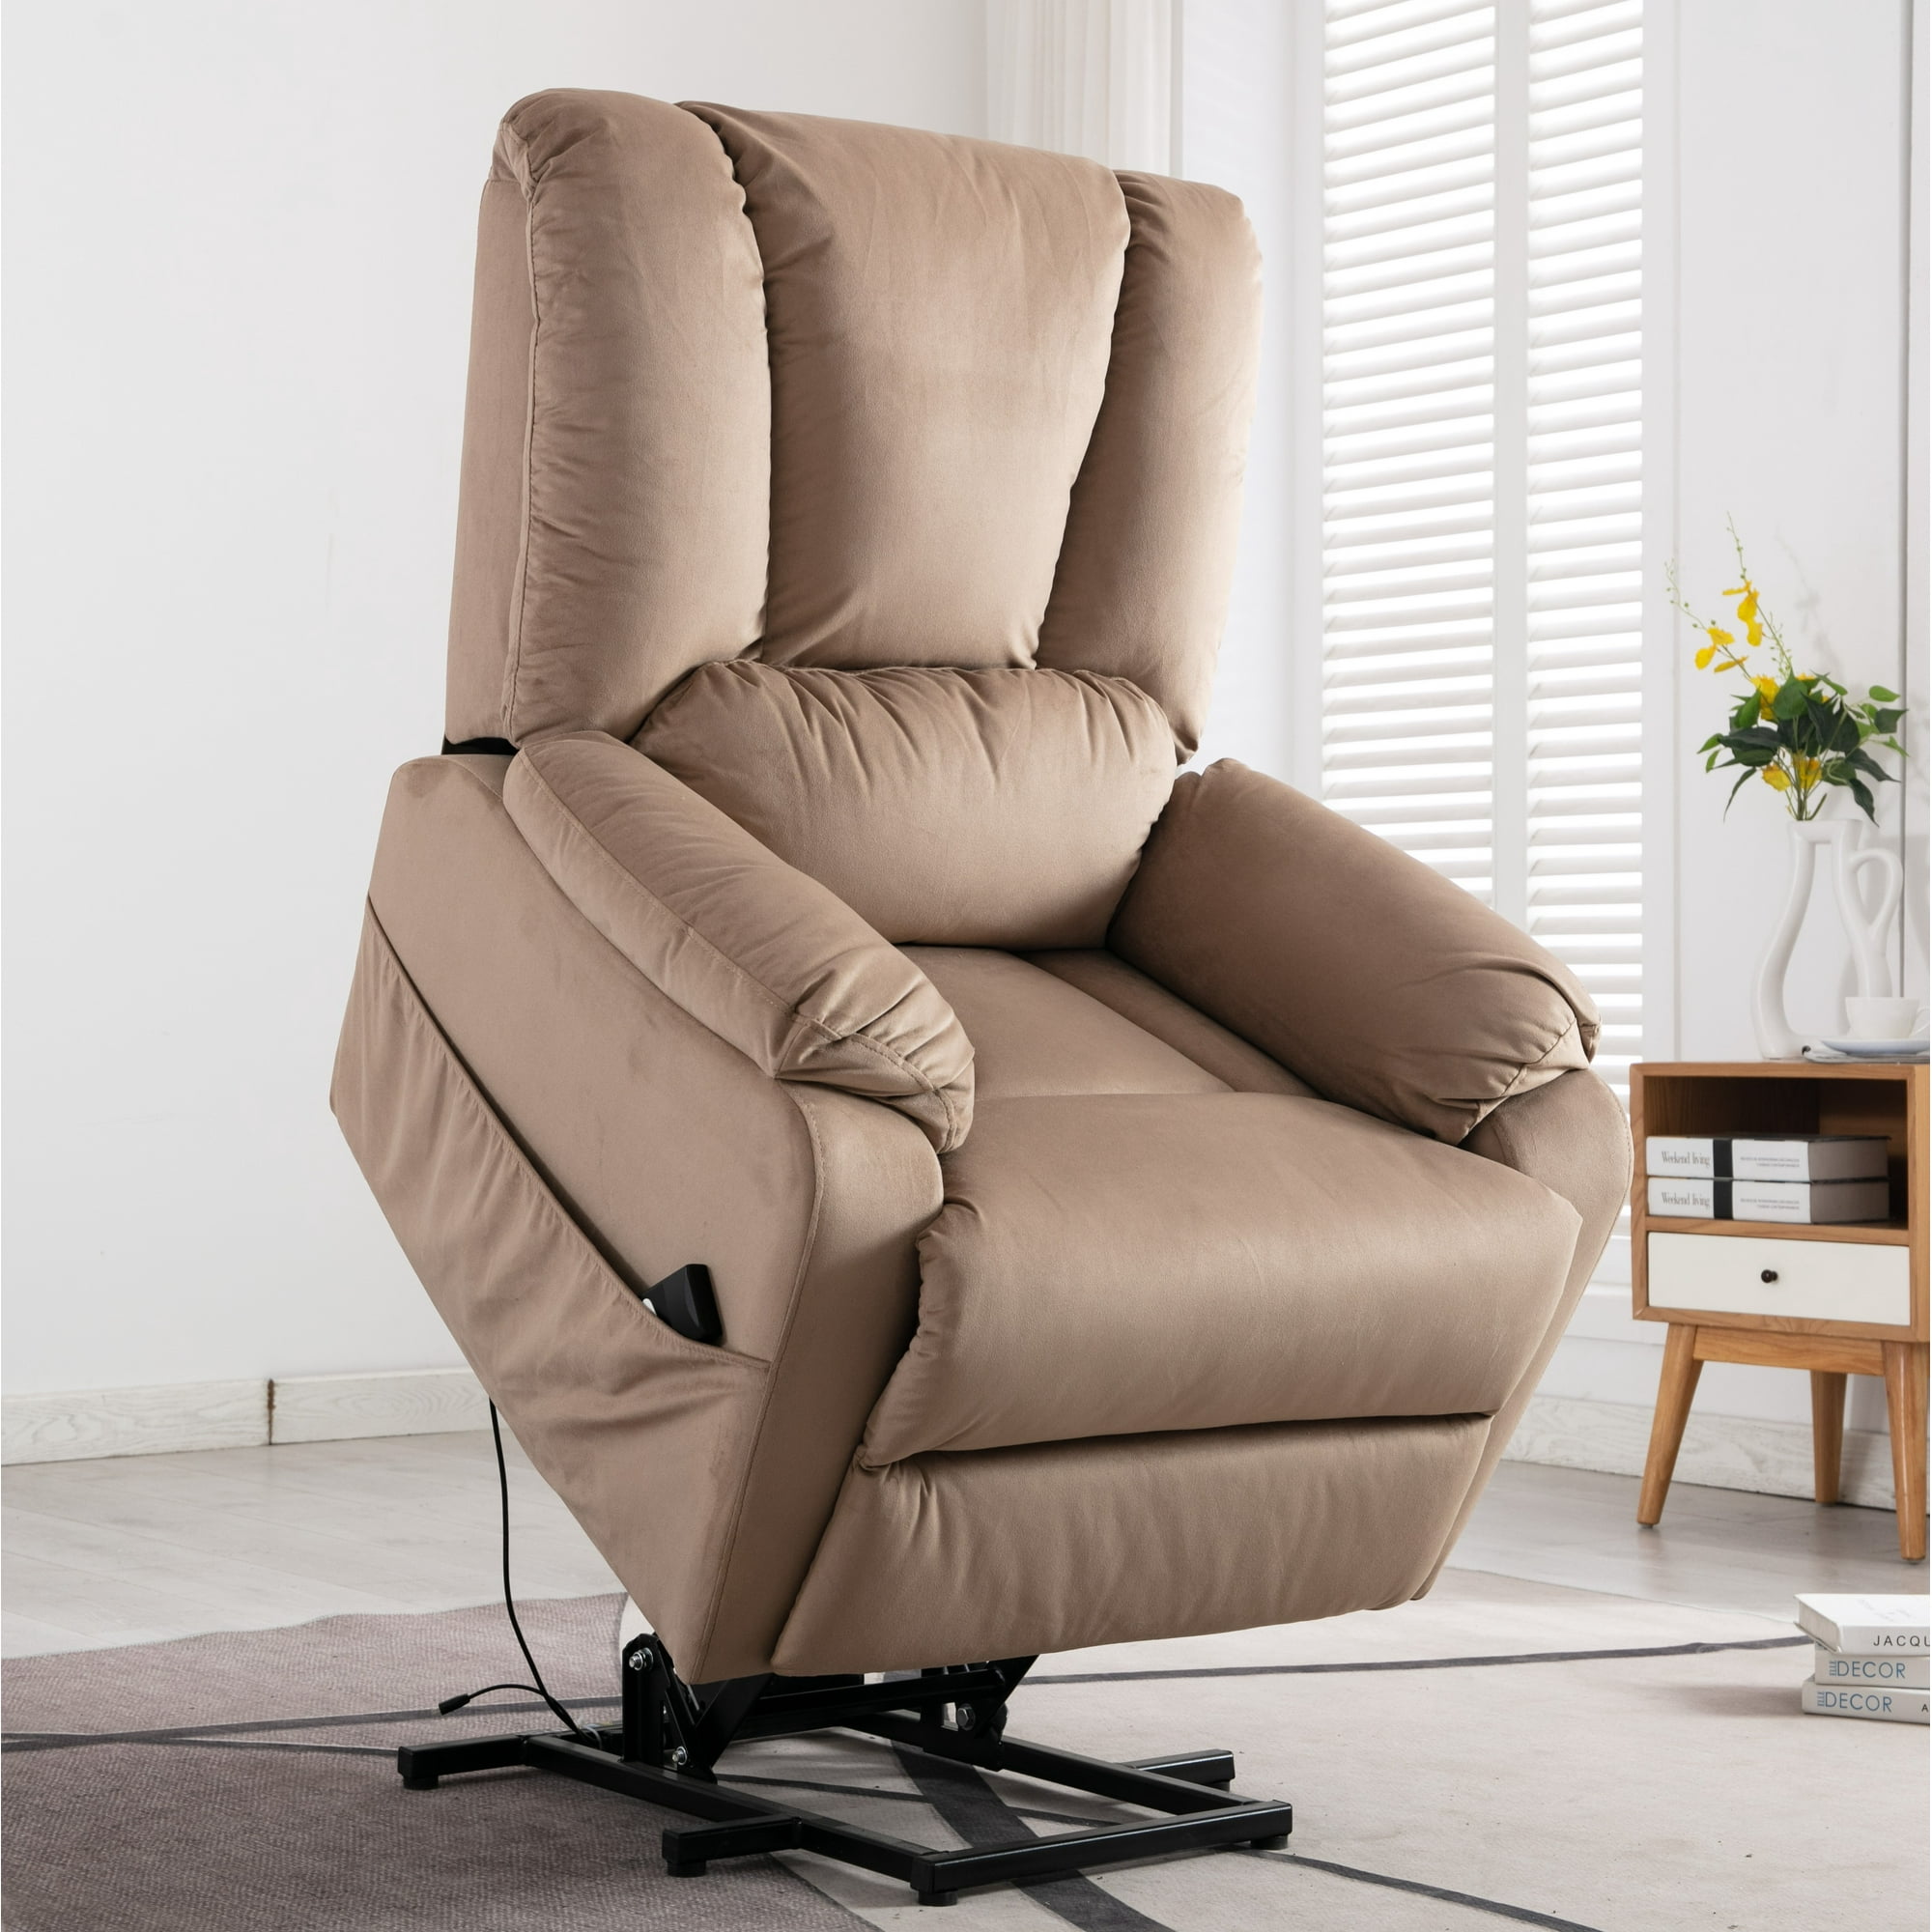 power lift recliner chair btmway ergonomic lift chair recliner power  reclining chair for elderly theater seatingbedroomliving room lazy boy